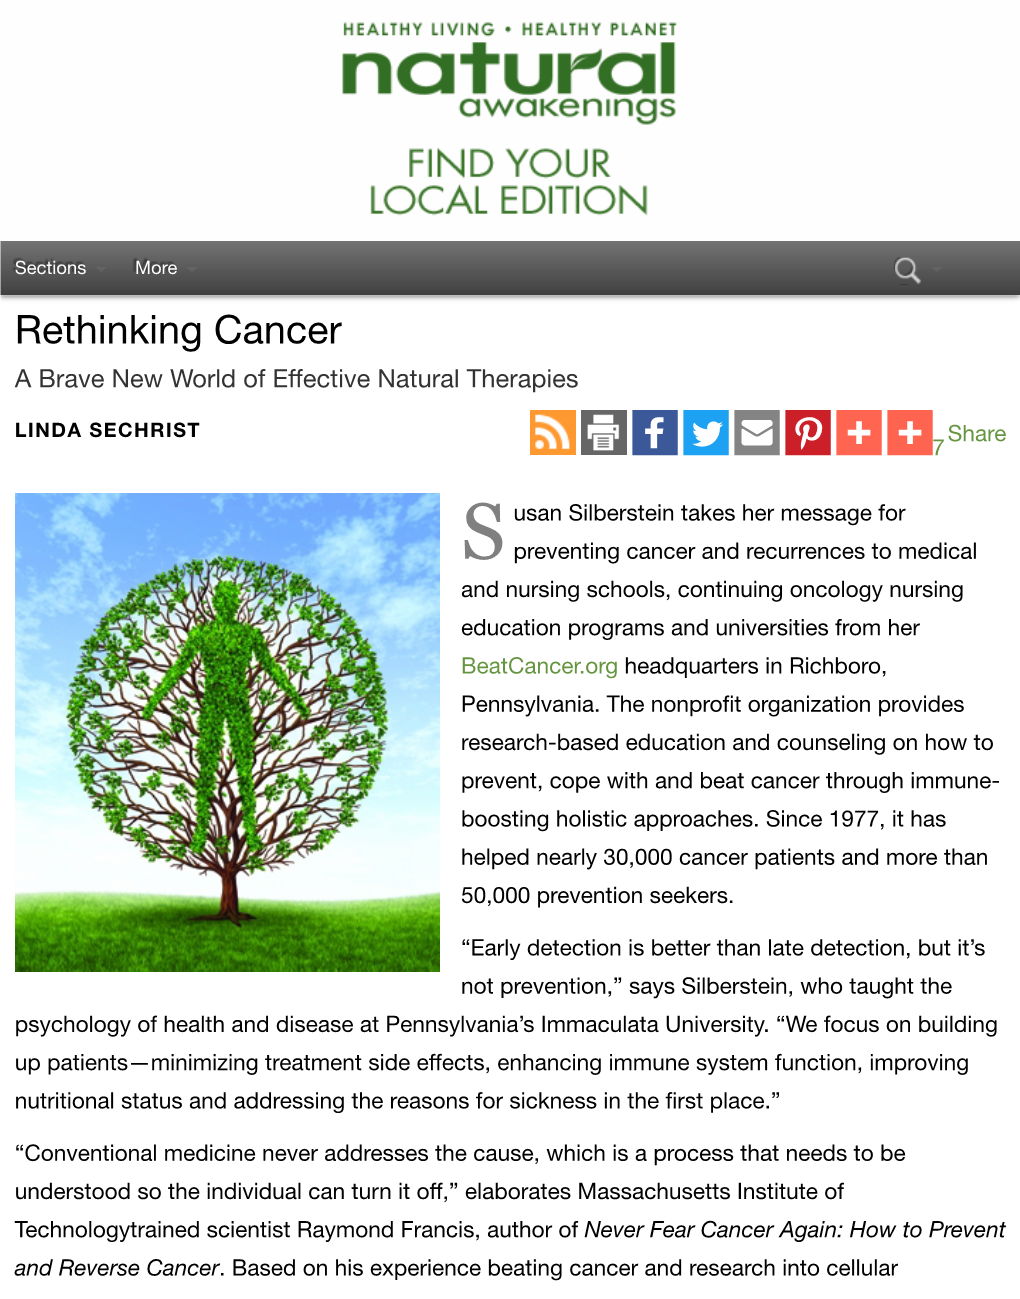 Rethinking Cancer a Brave New World of Eﬀective Natural Therapies